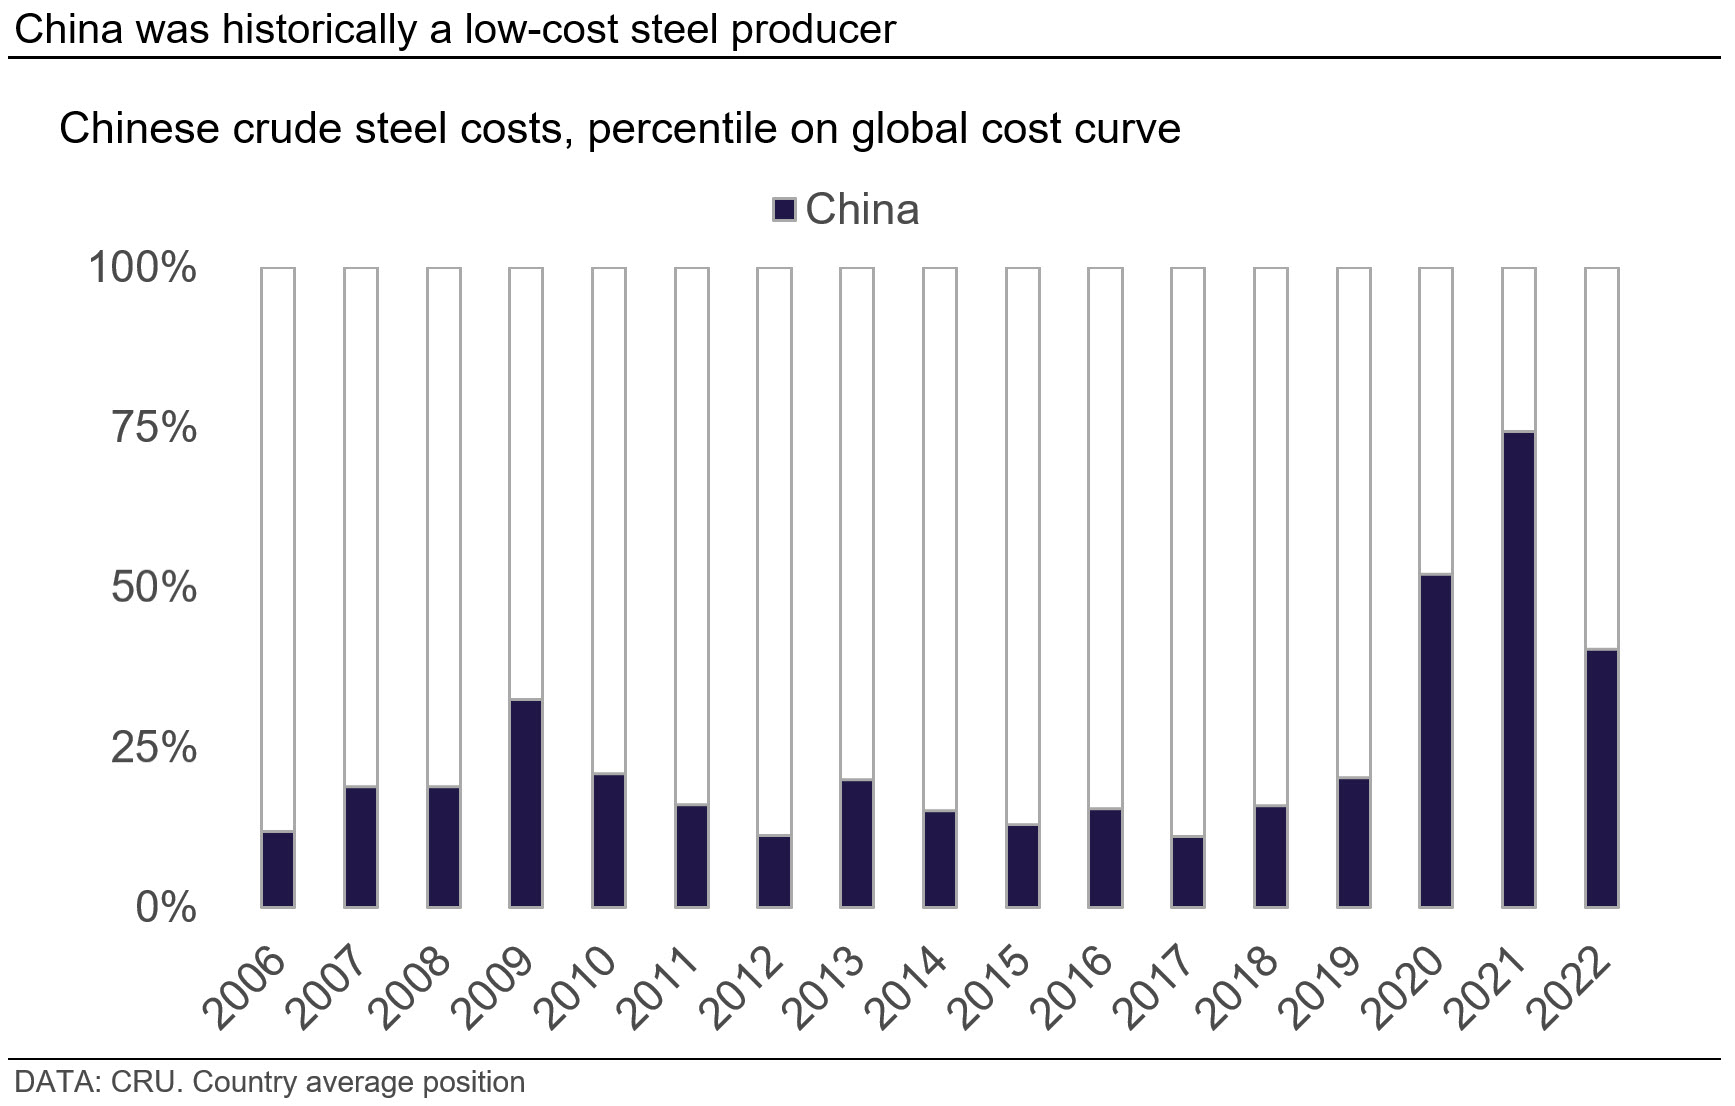 Graph showing that China was historically a low-cost steel producer